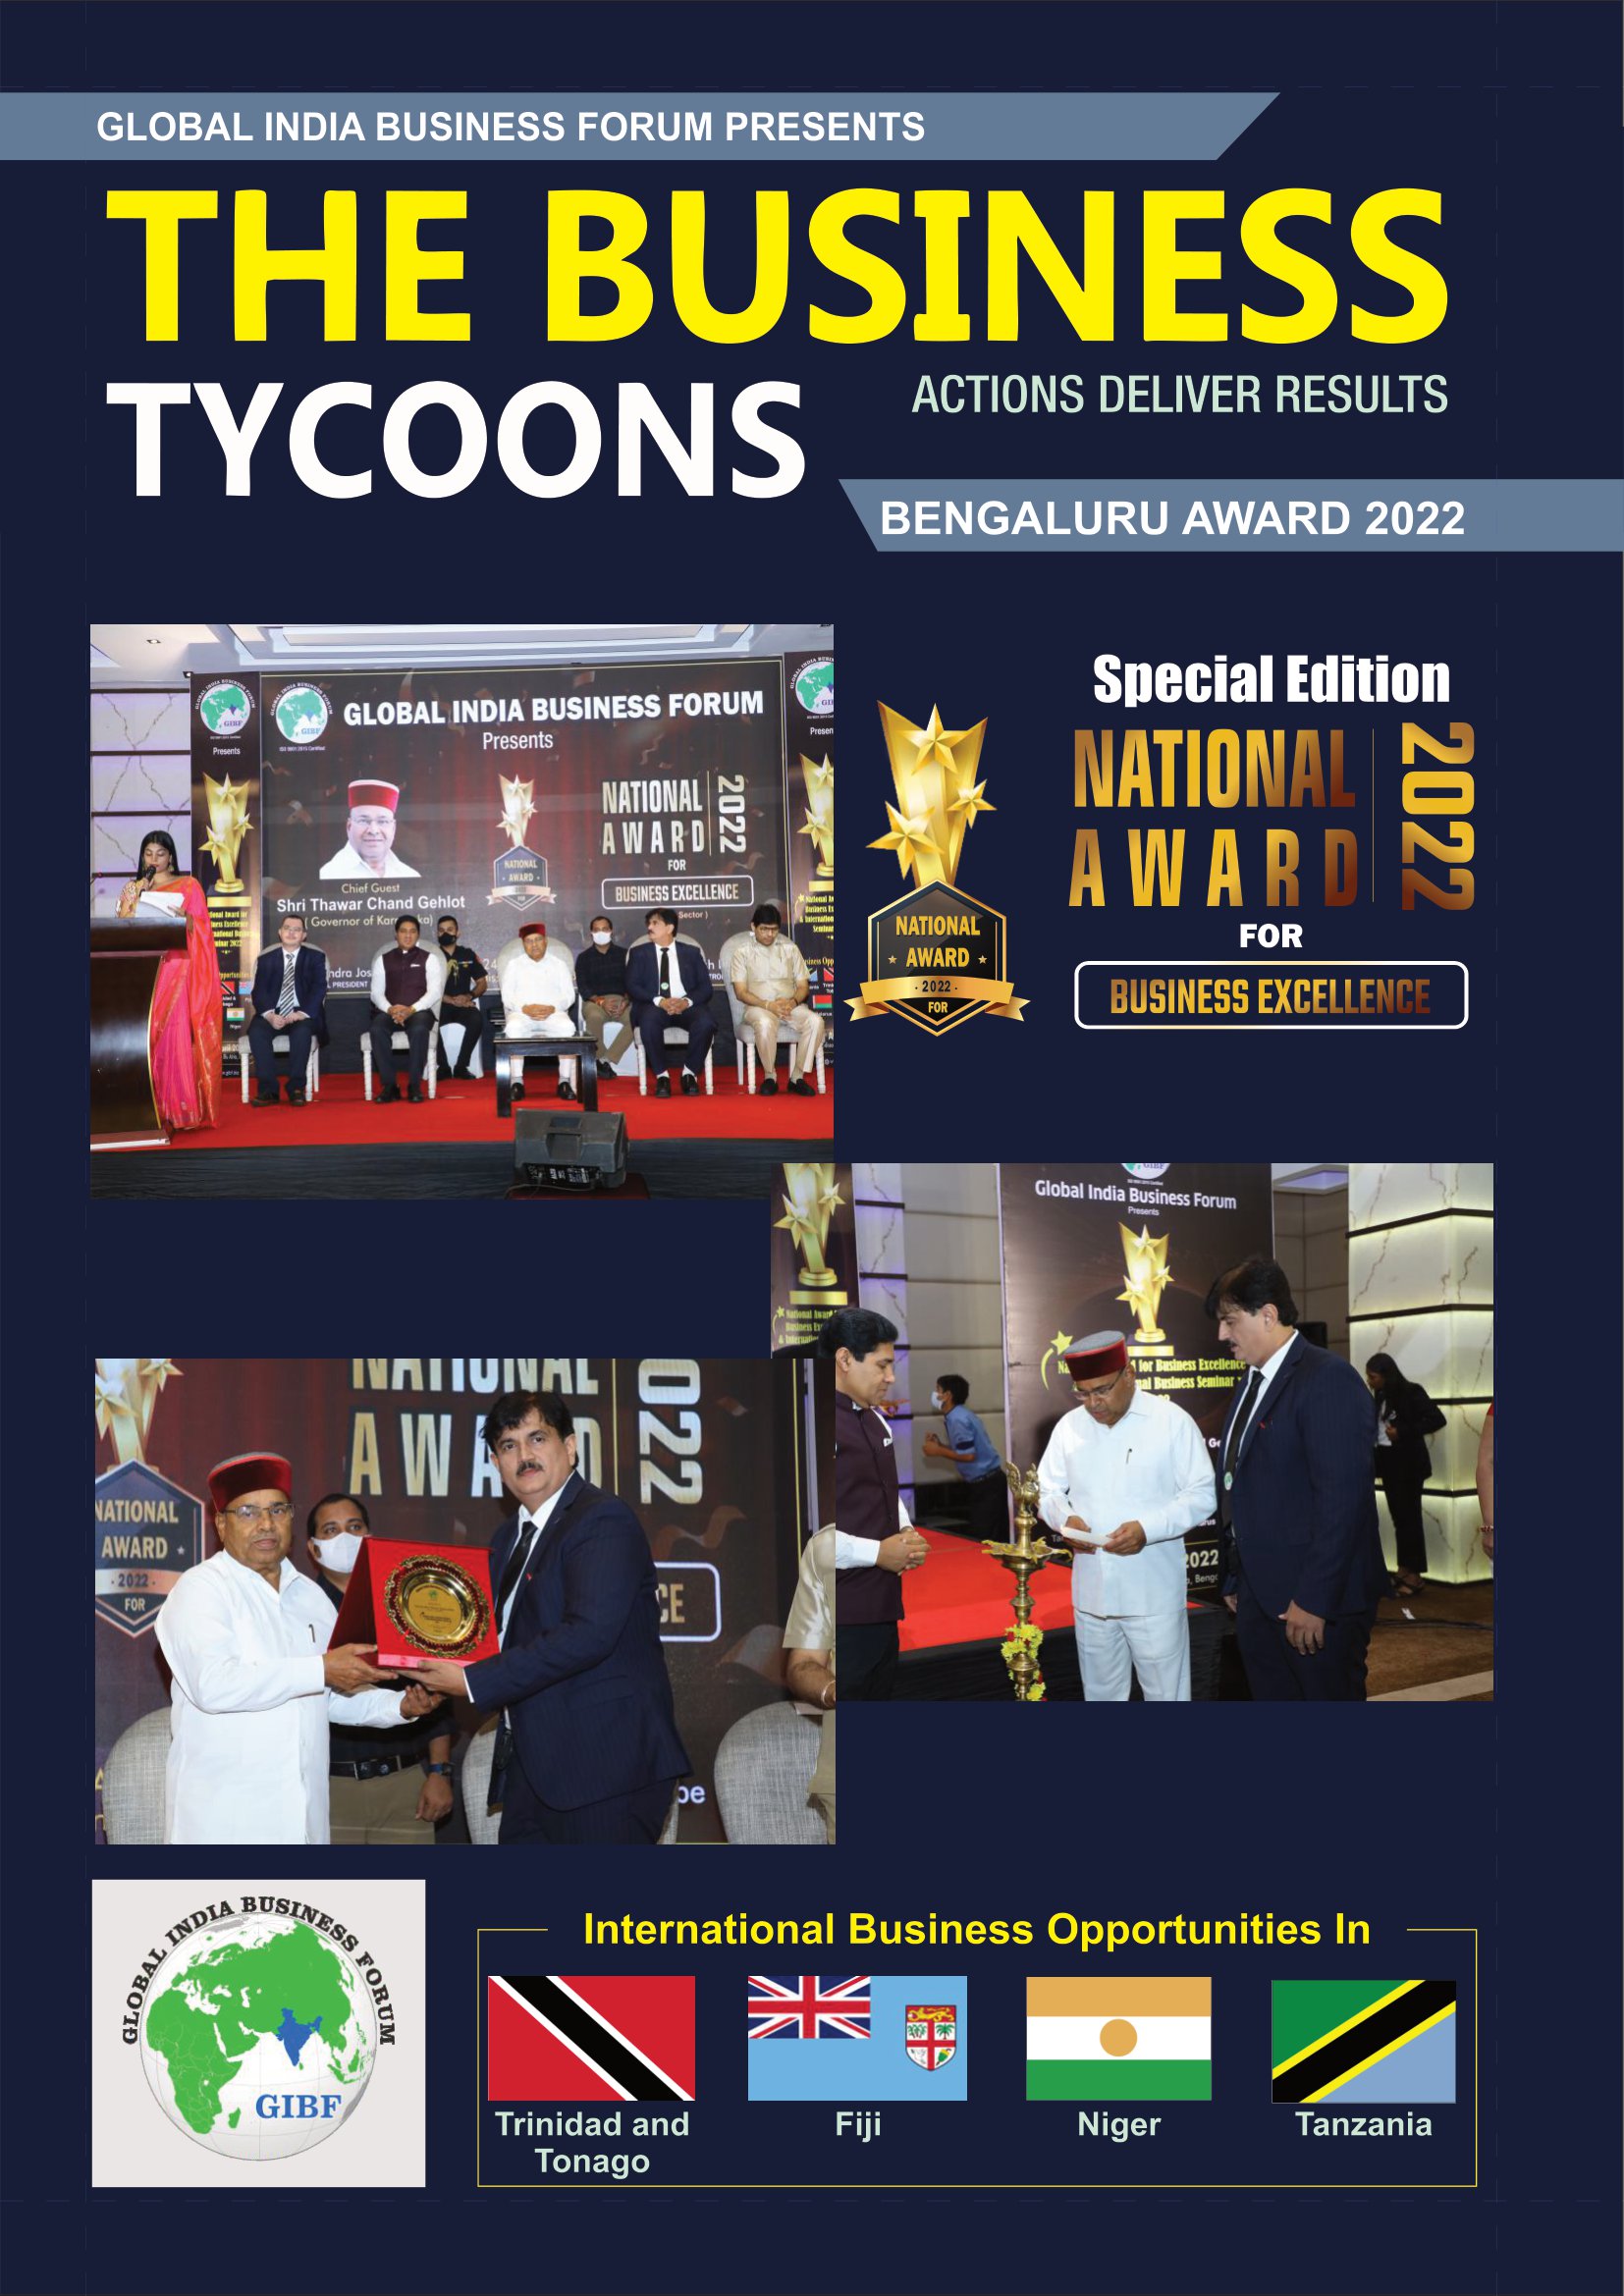 the-business-tycoons-national-awards-for-business-excellence-2022-bengaluru